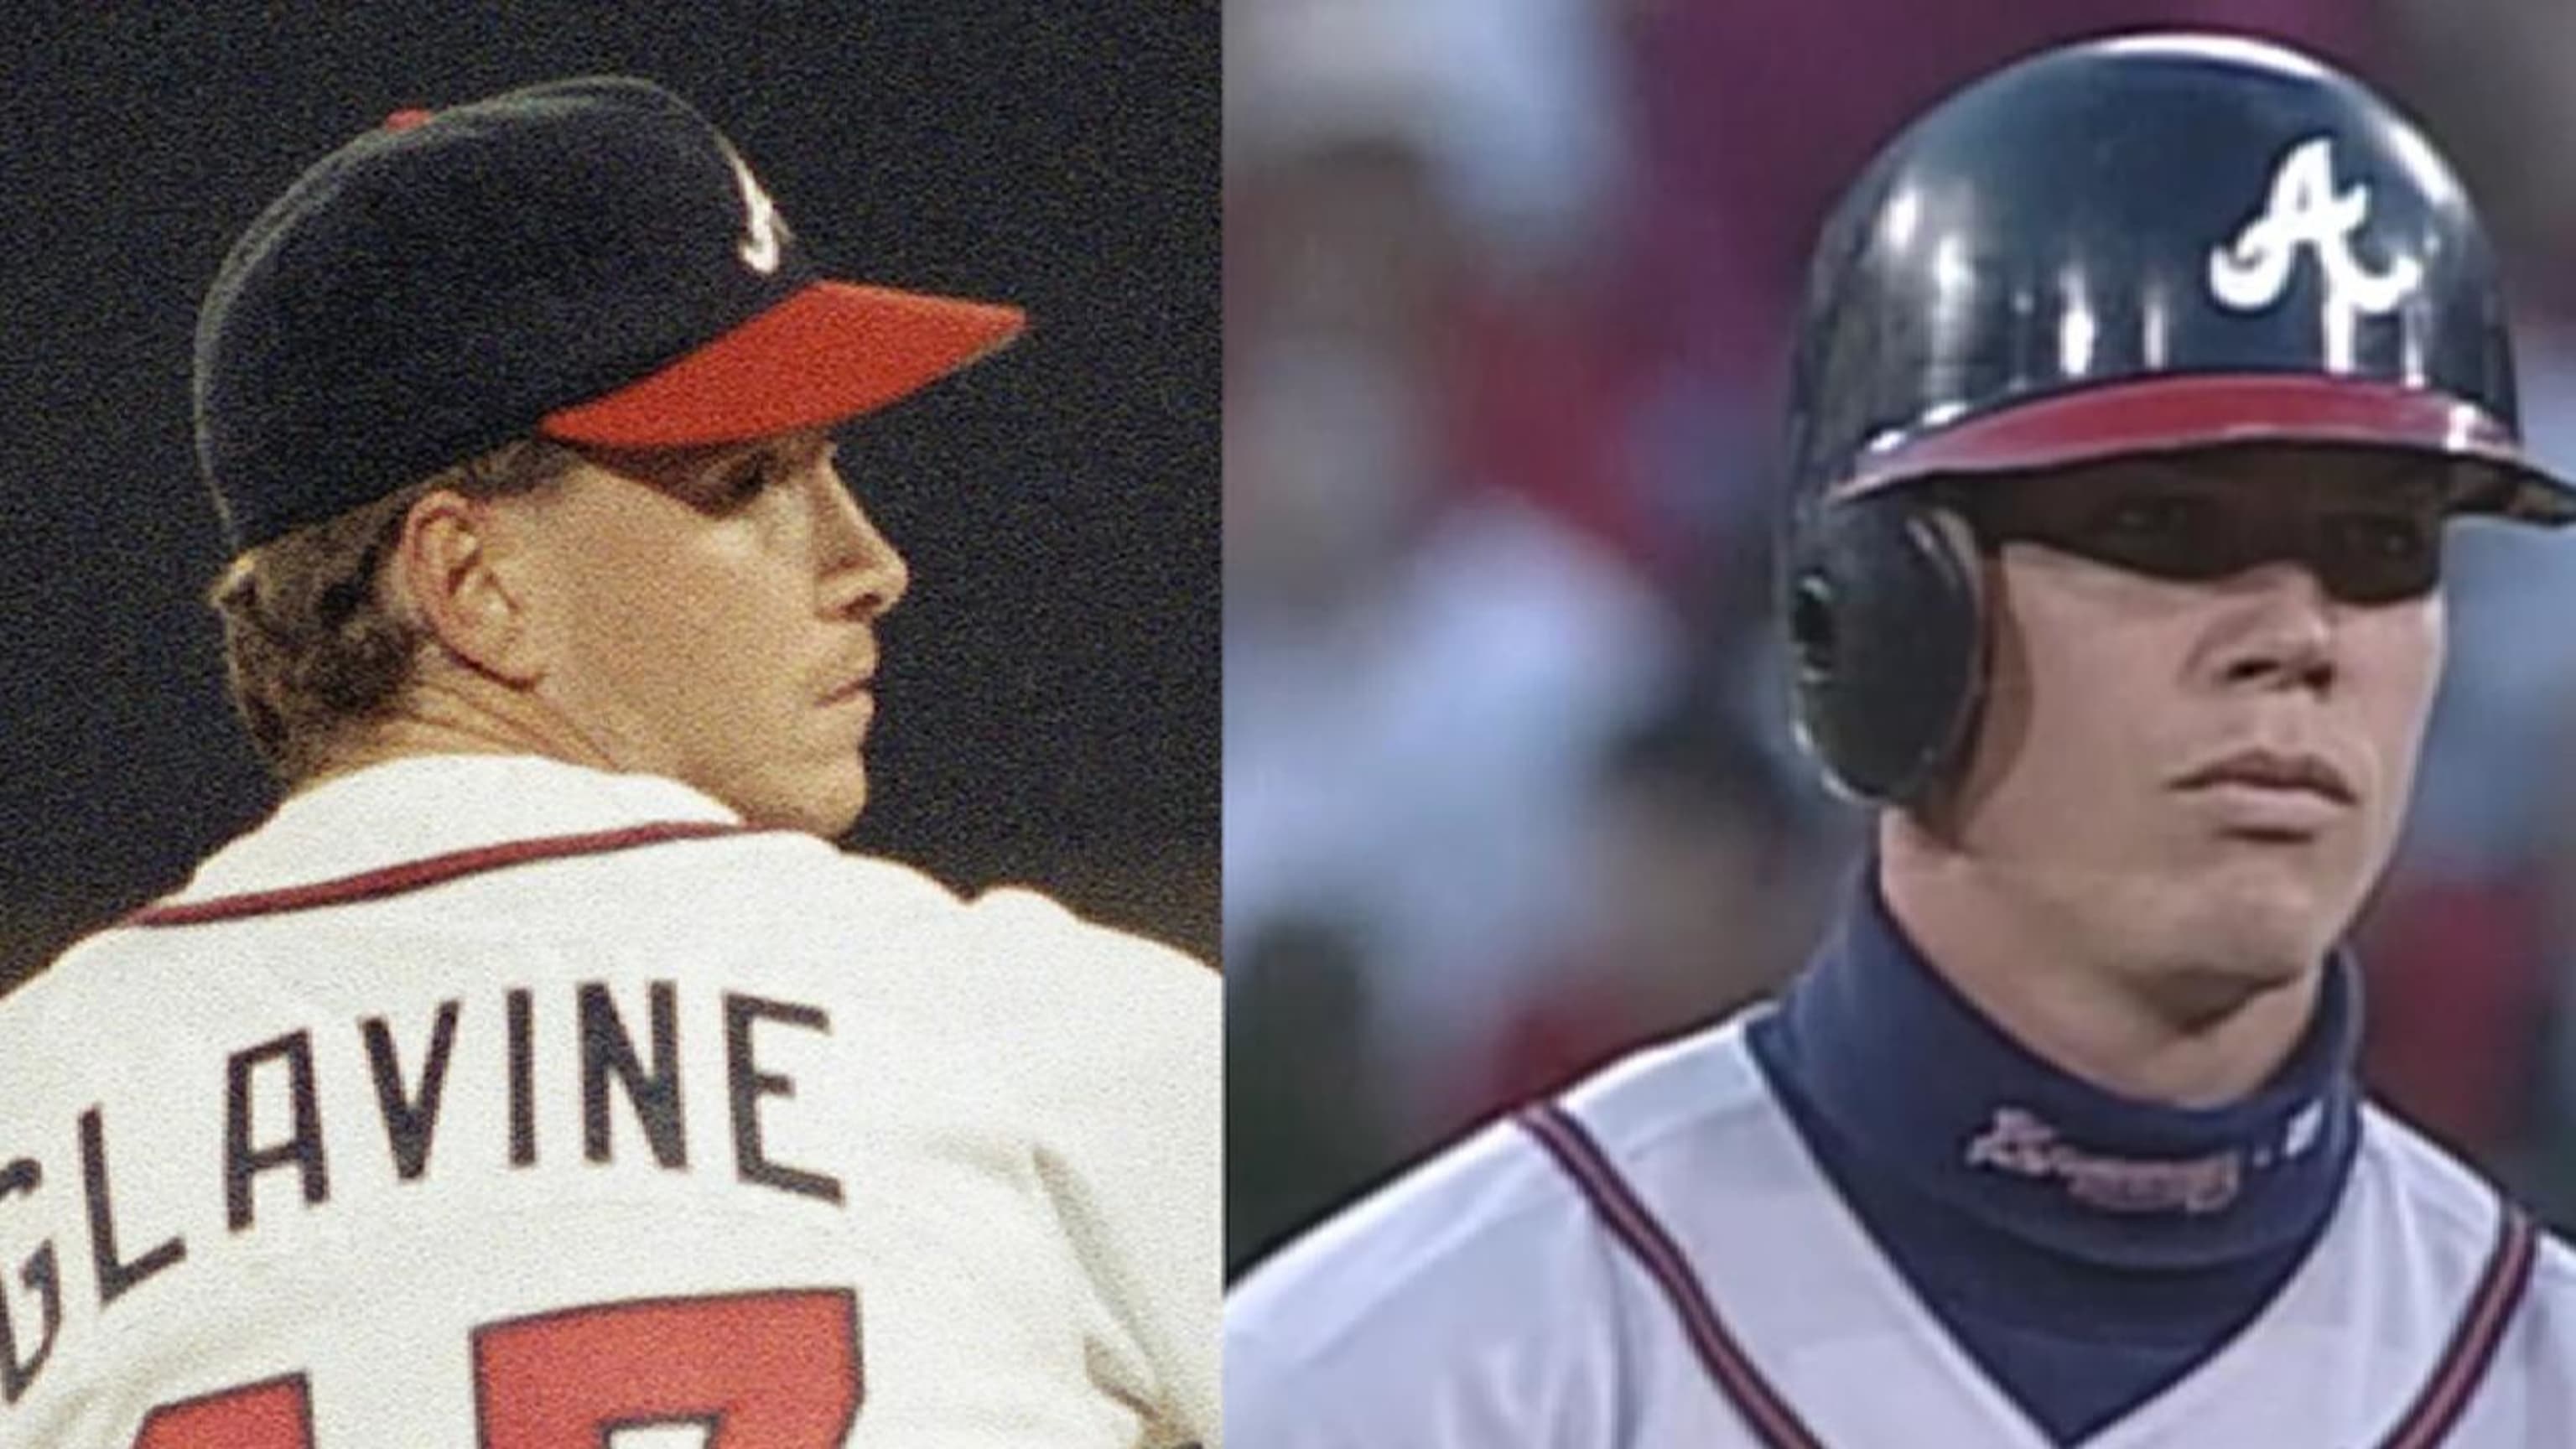 Atlanta Braves: Chipper Jones elected to another Hall of Fame